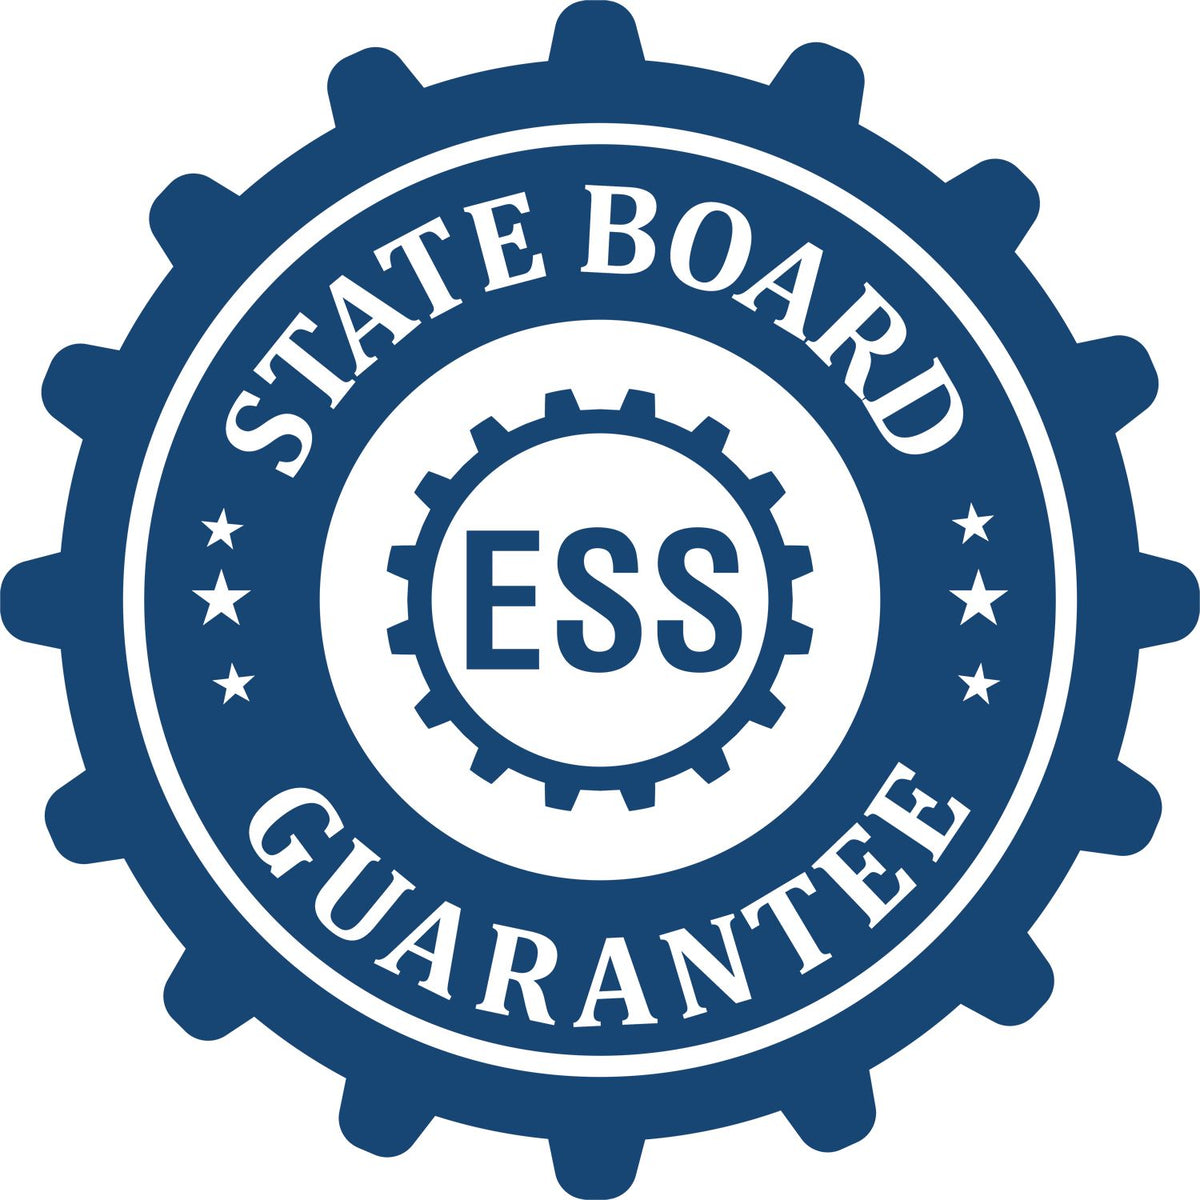 An emblem in a gear shape illustrating a state board guarantee for the Hybrid Washington Architect Seal